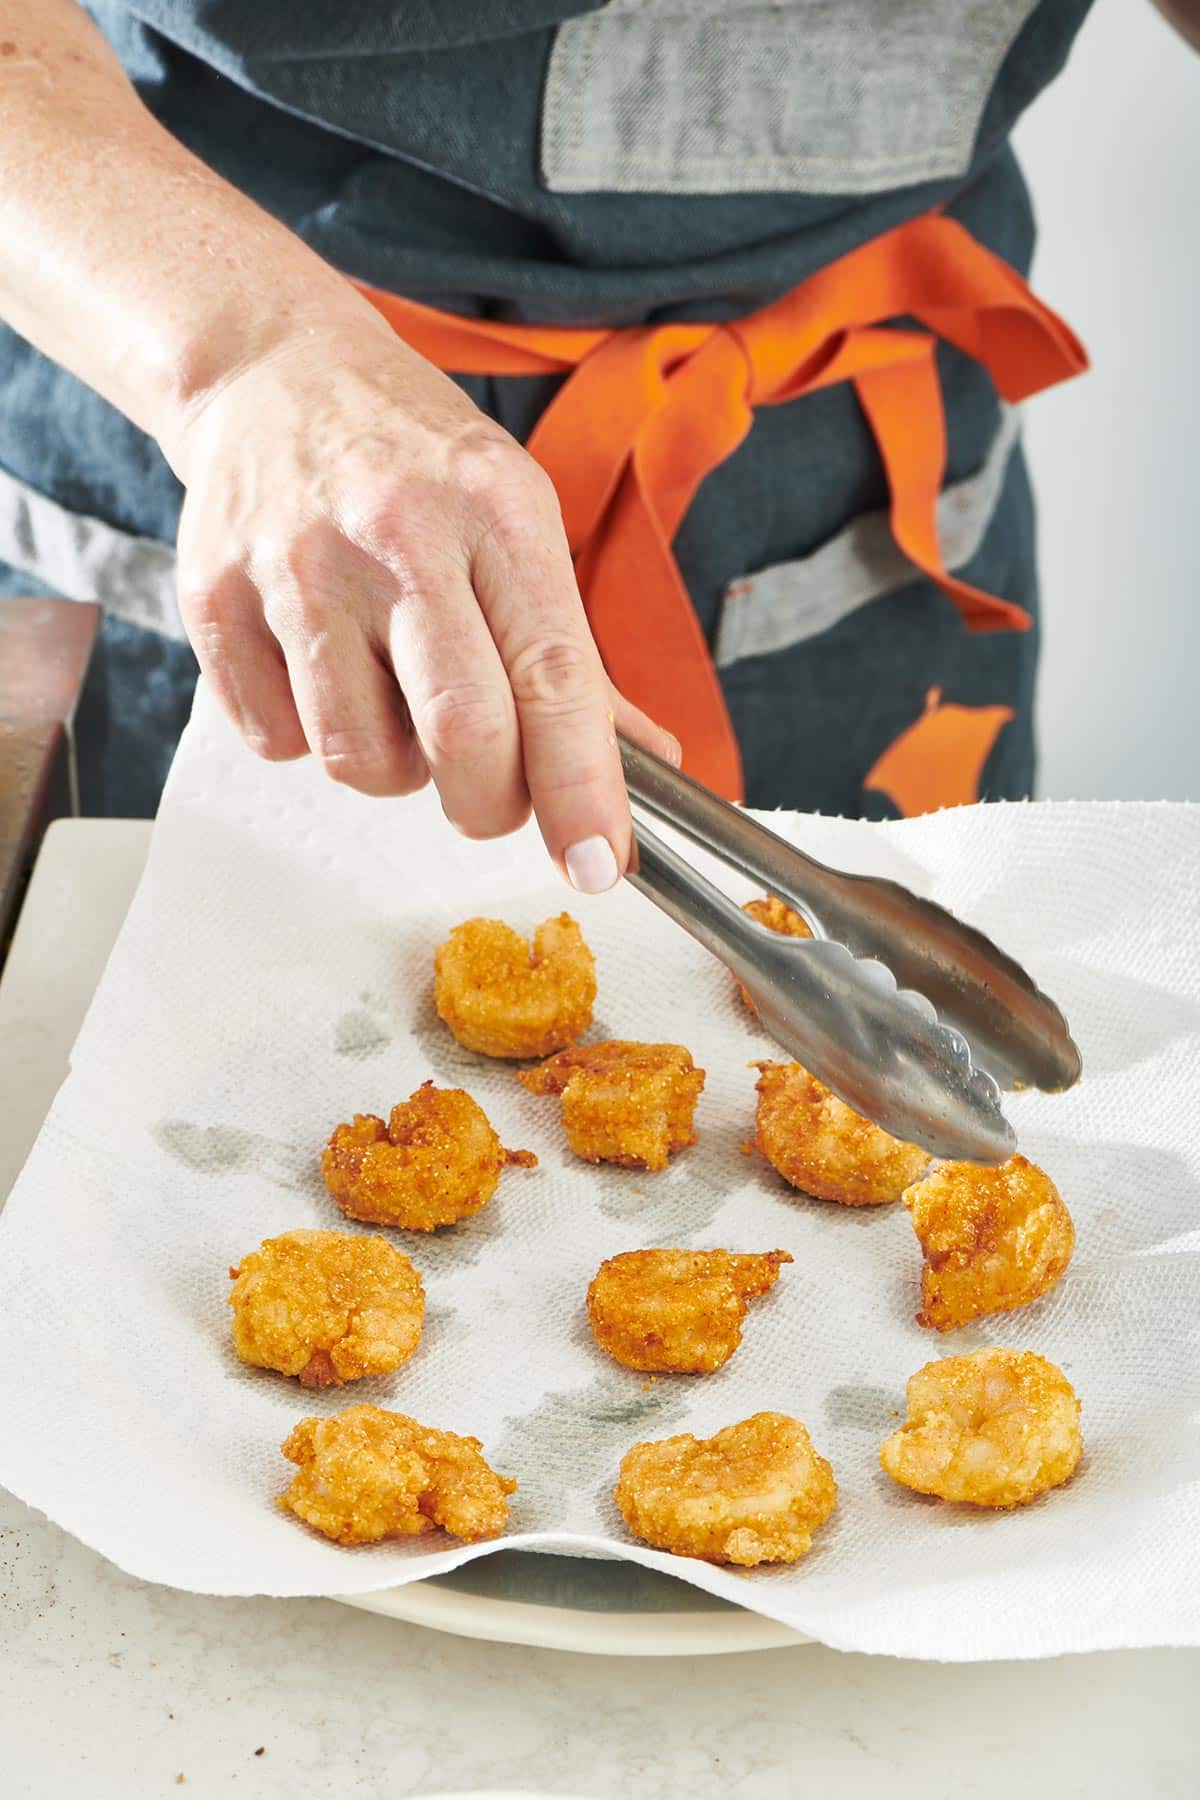 Woman using tongs to place fried shrimp on paper towels.